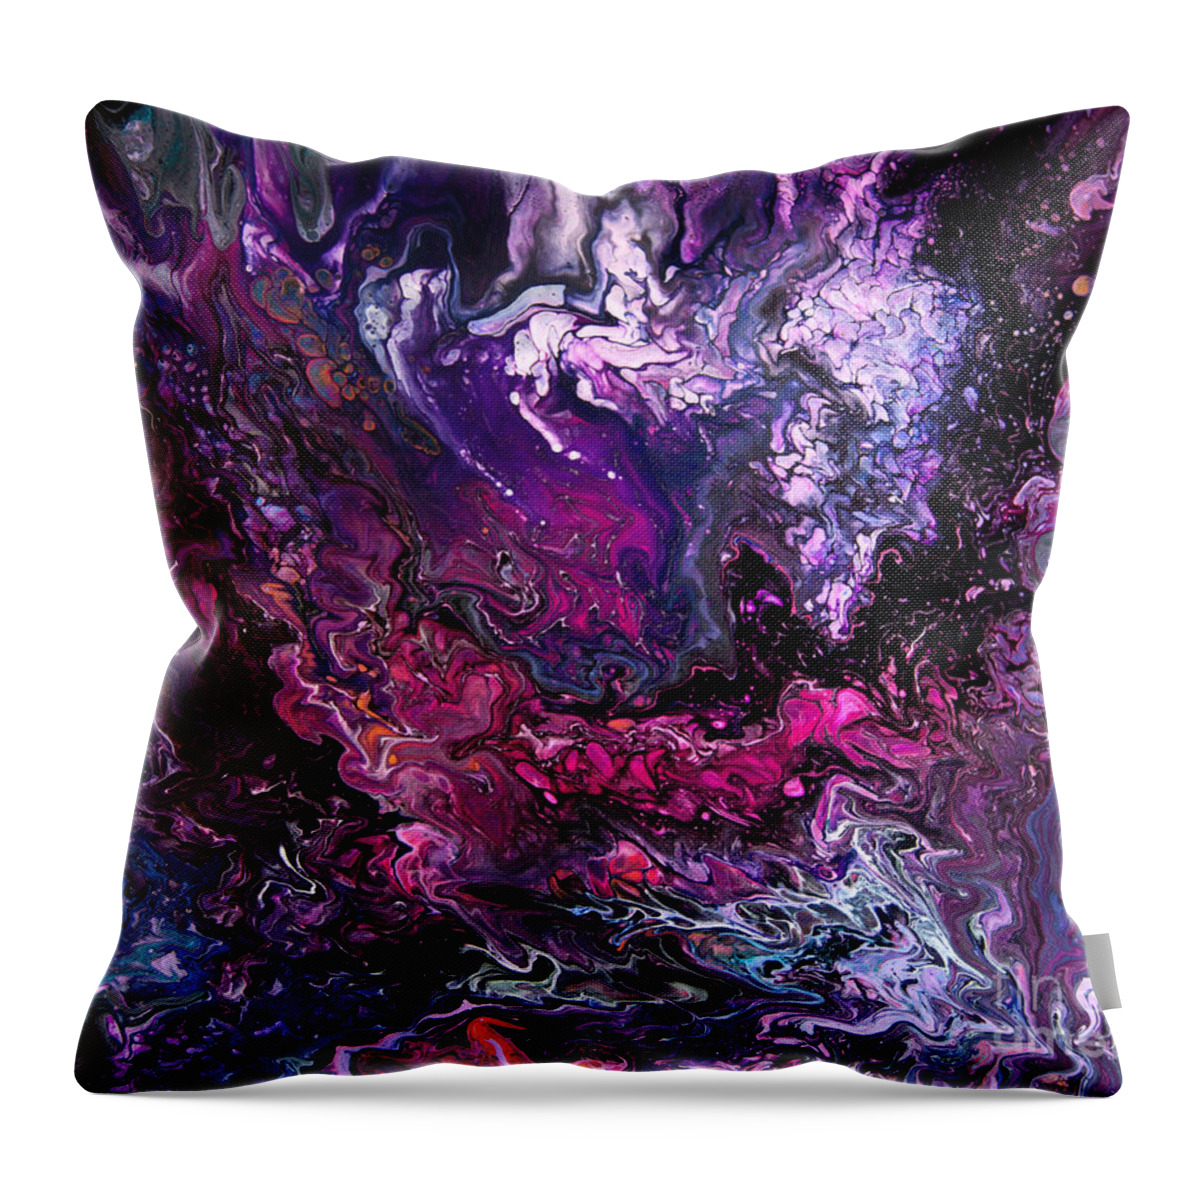 Space Celestial Purple Fantastic Throw Pillow featuring the painting Purple Galaxy View 7668 by Priscilla Batzell Expressionist Art Studio Gallery